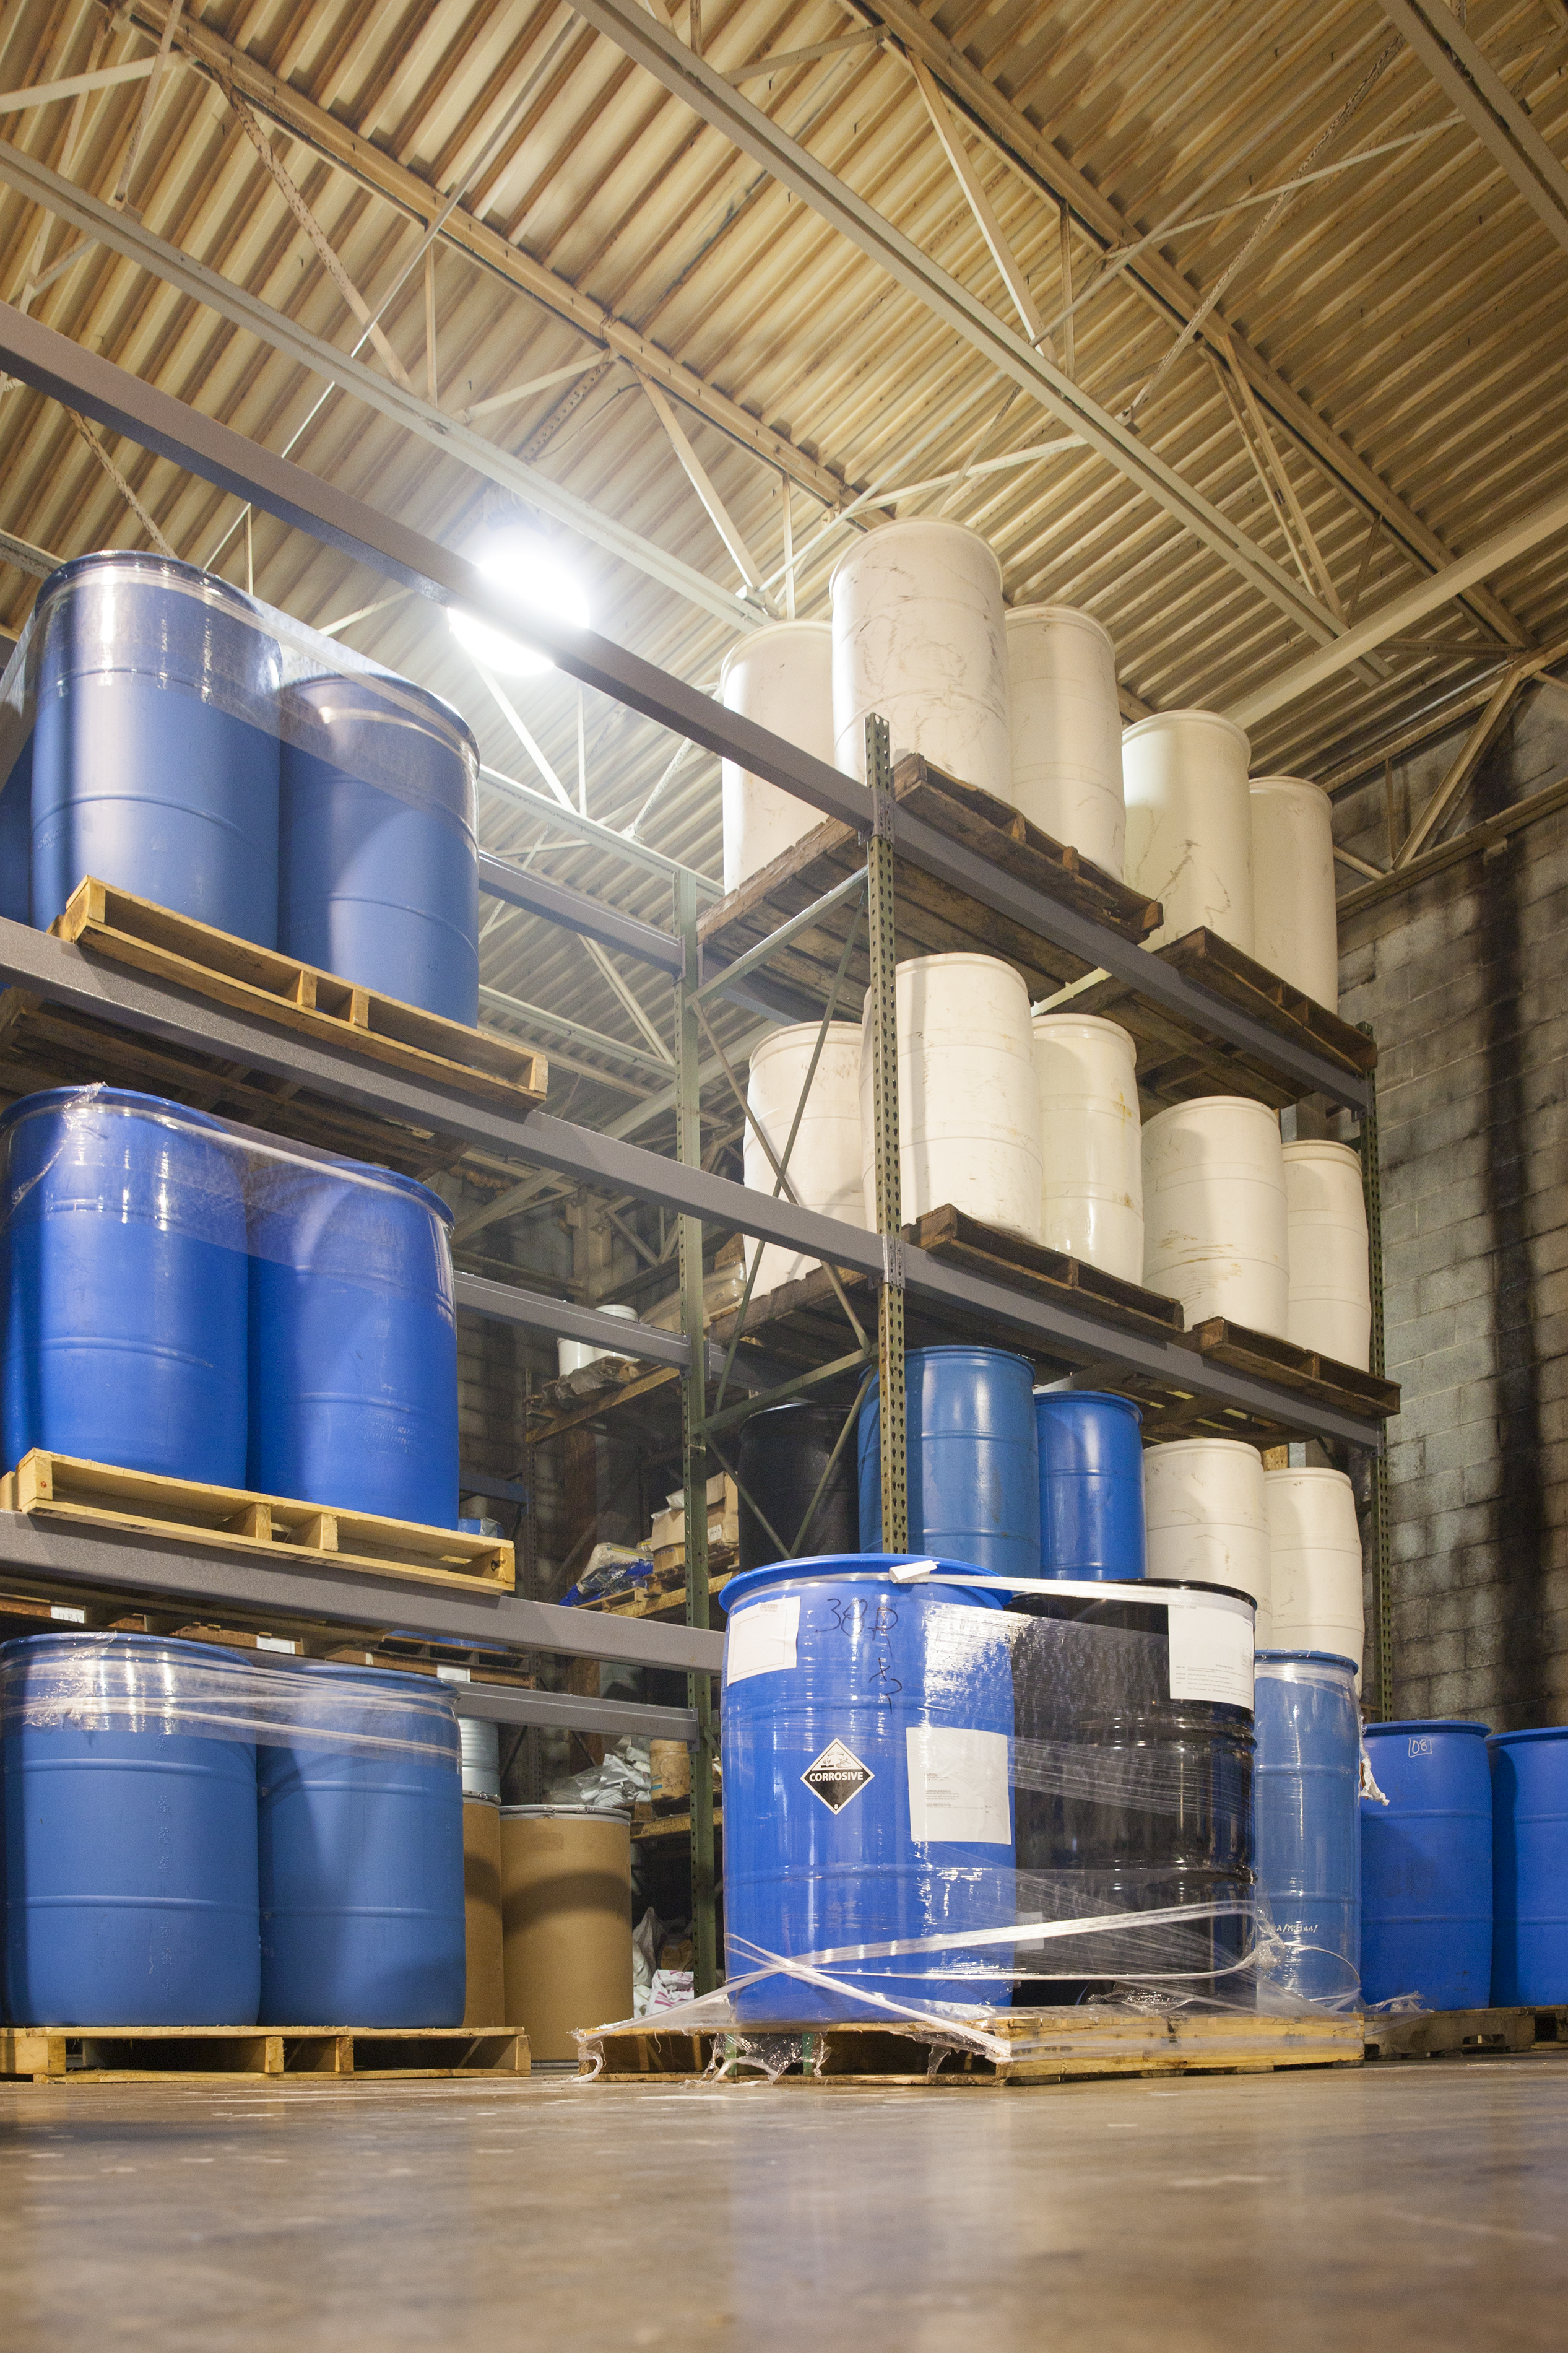 55 Gallon drums are stacked on pallets at an industrial chemical warehouse. A corrosive sticker is visible on one drum.